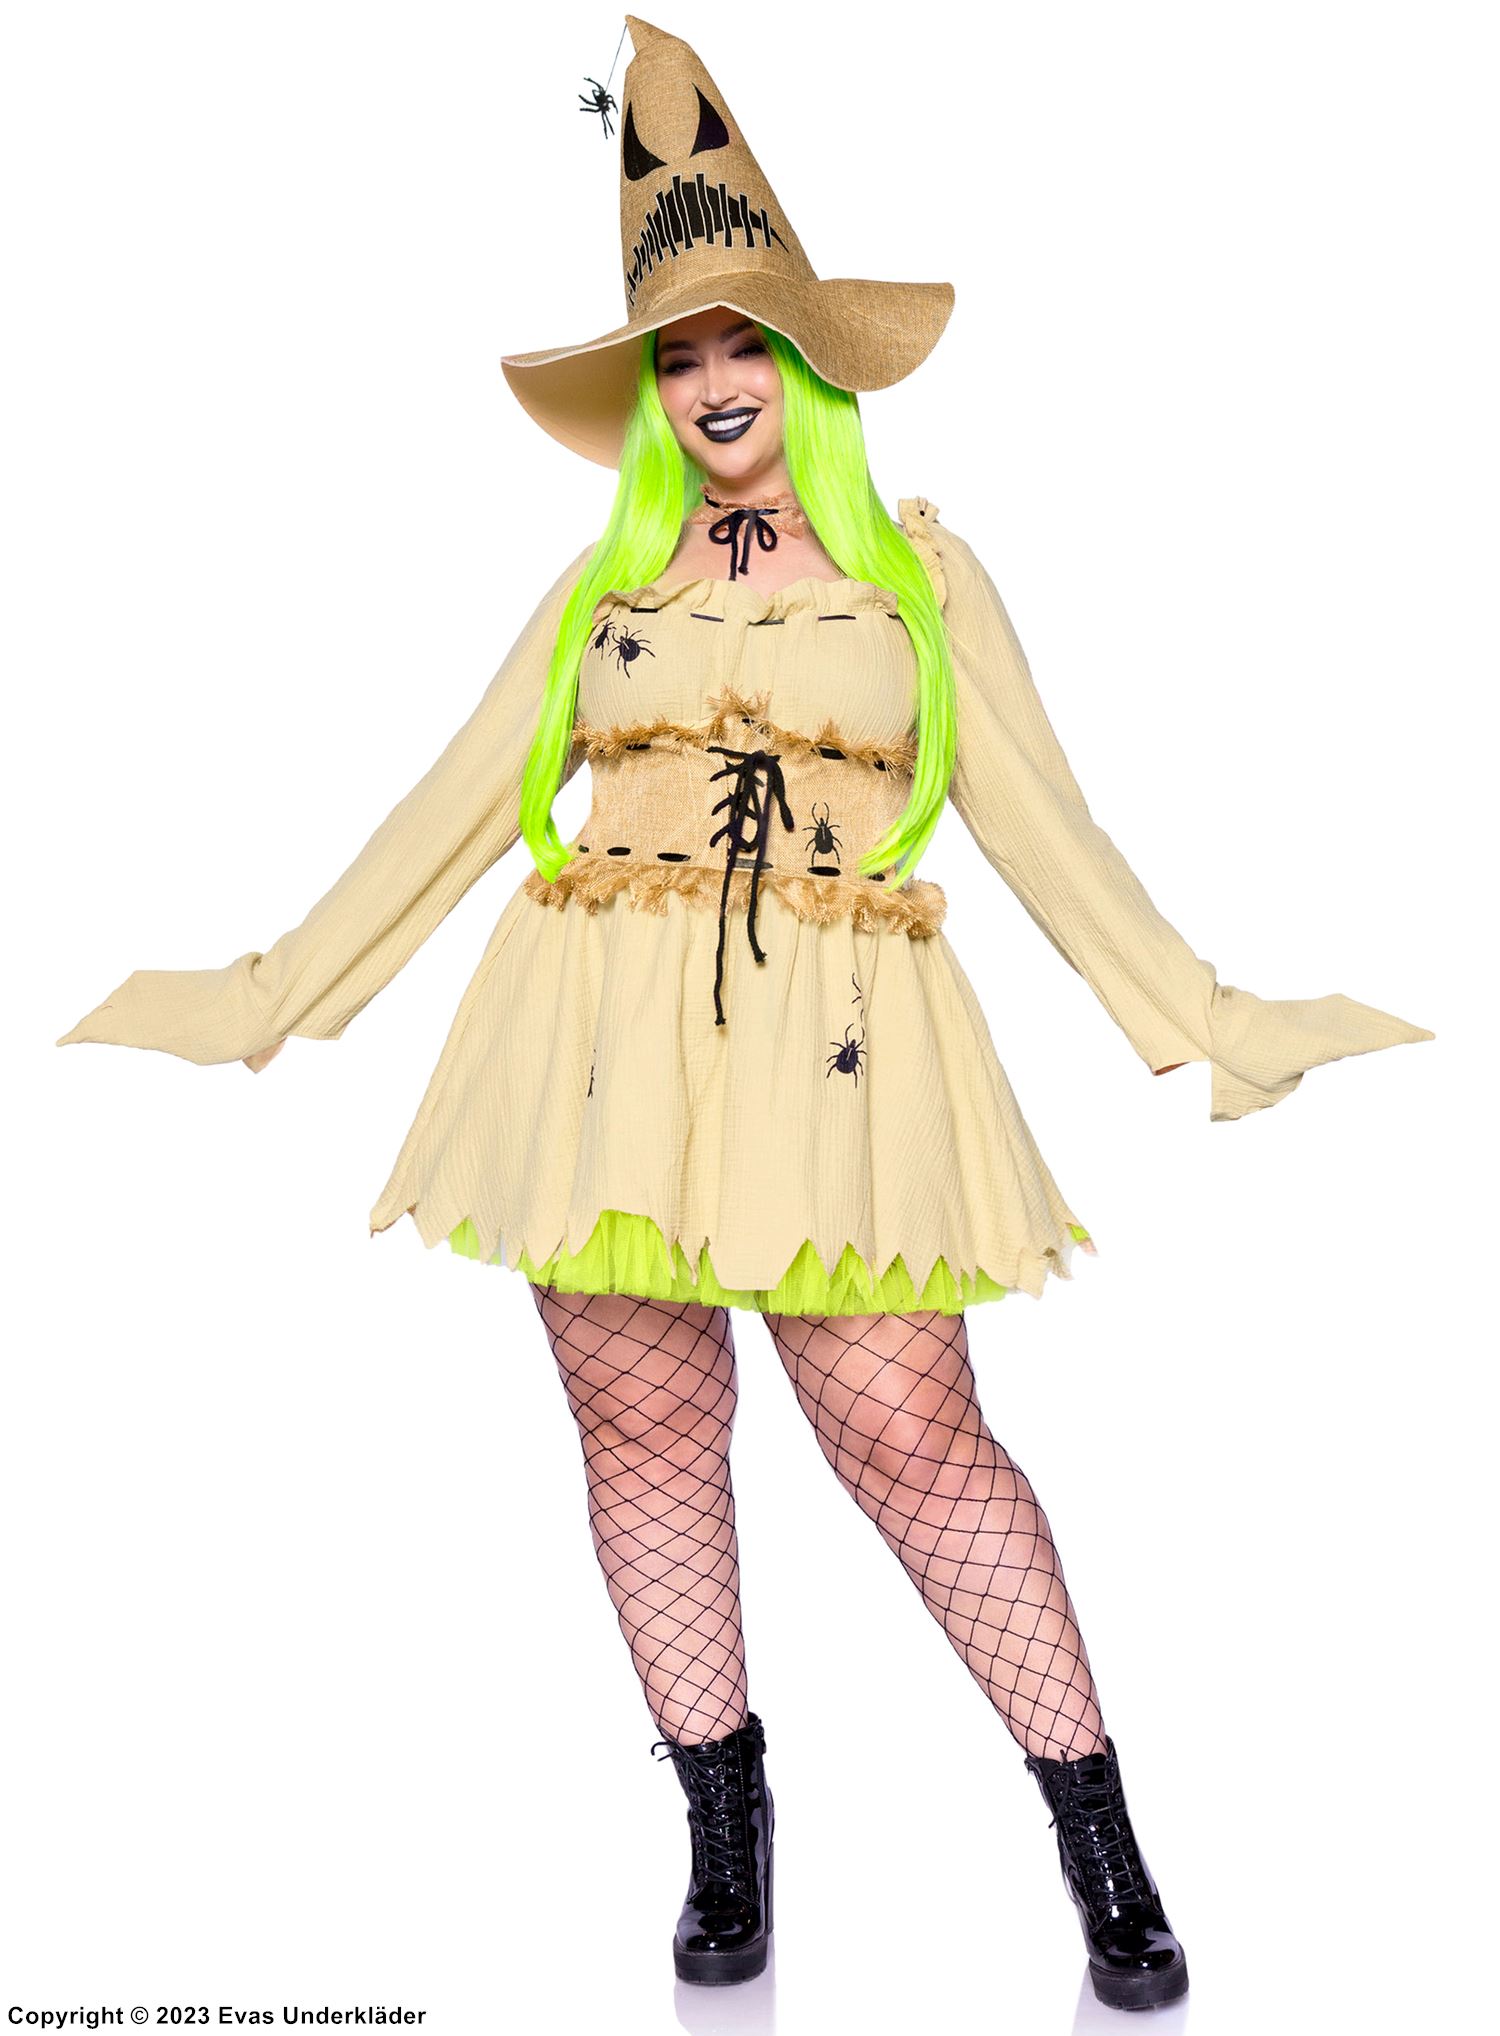 Female Oogie Boogie from Nightmare Before Christmas, costume dress, lacing, tatters, spiders, plus size